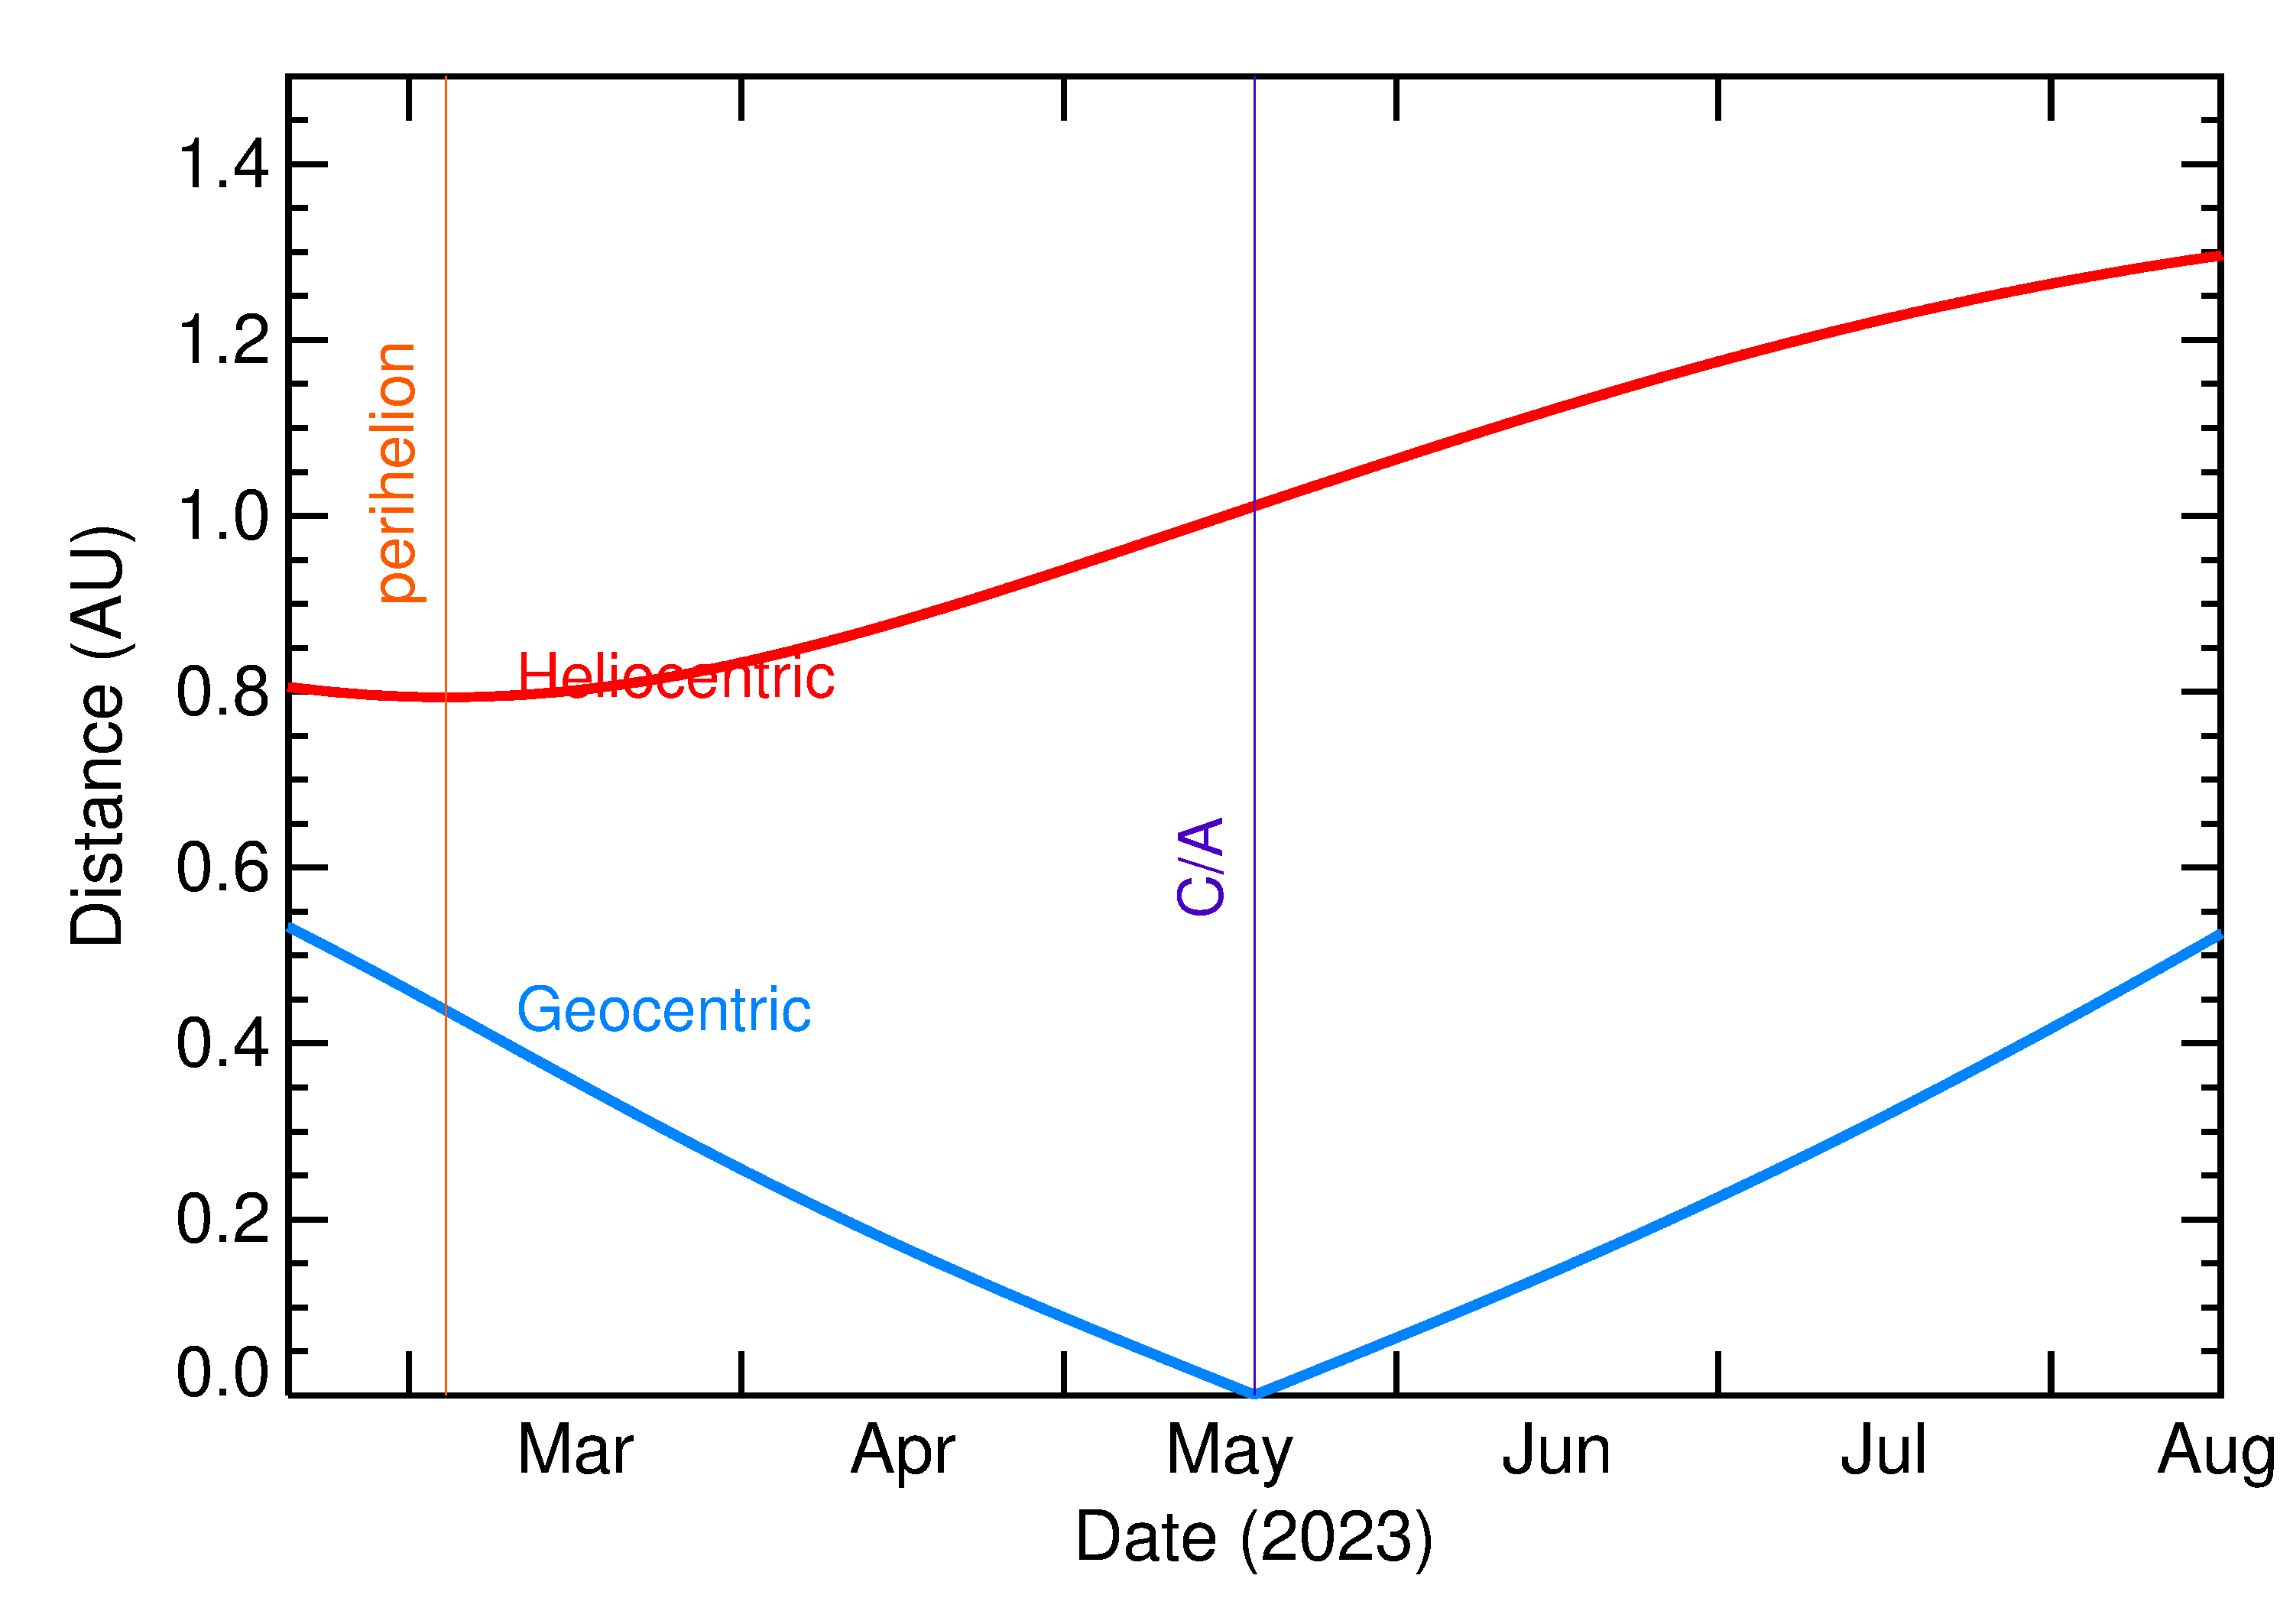 Heliocentric and Geocentric Distances of 2023 KT in the months around closest approach